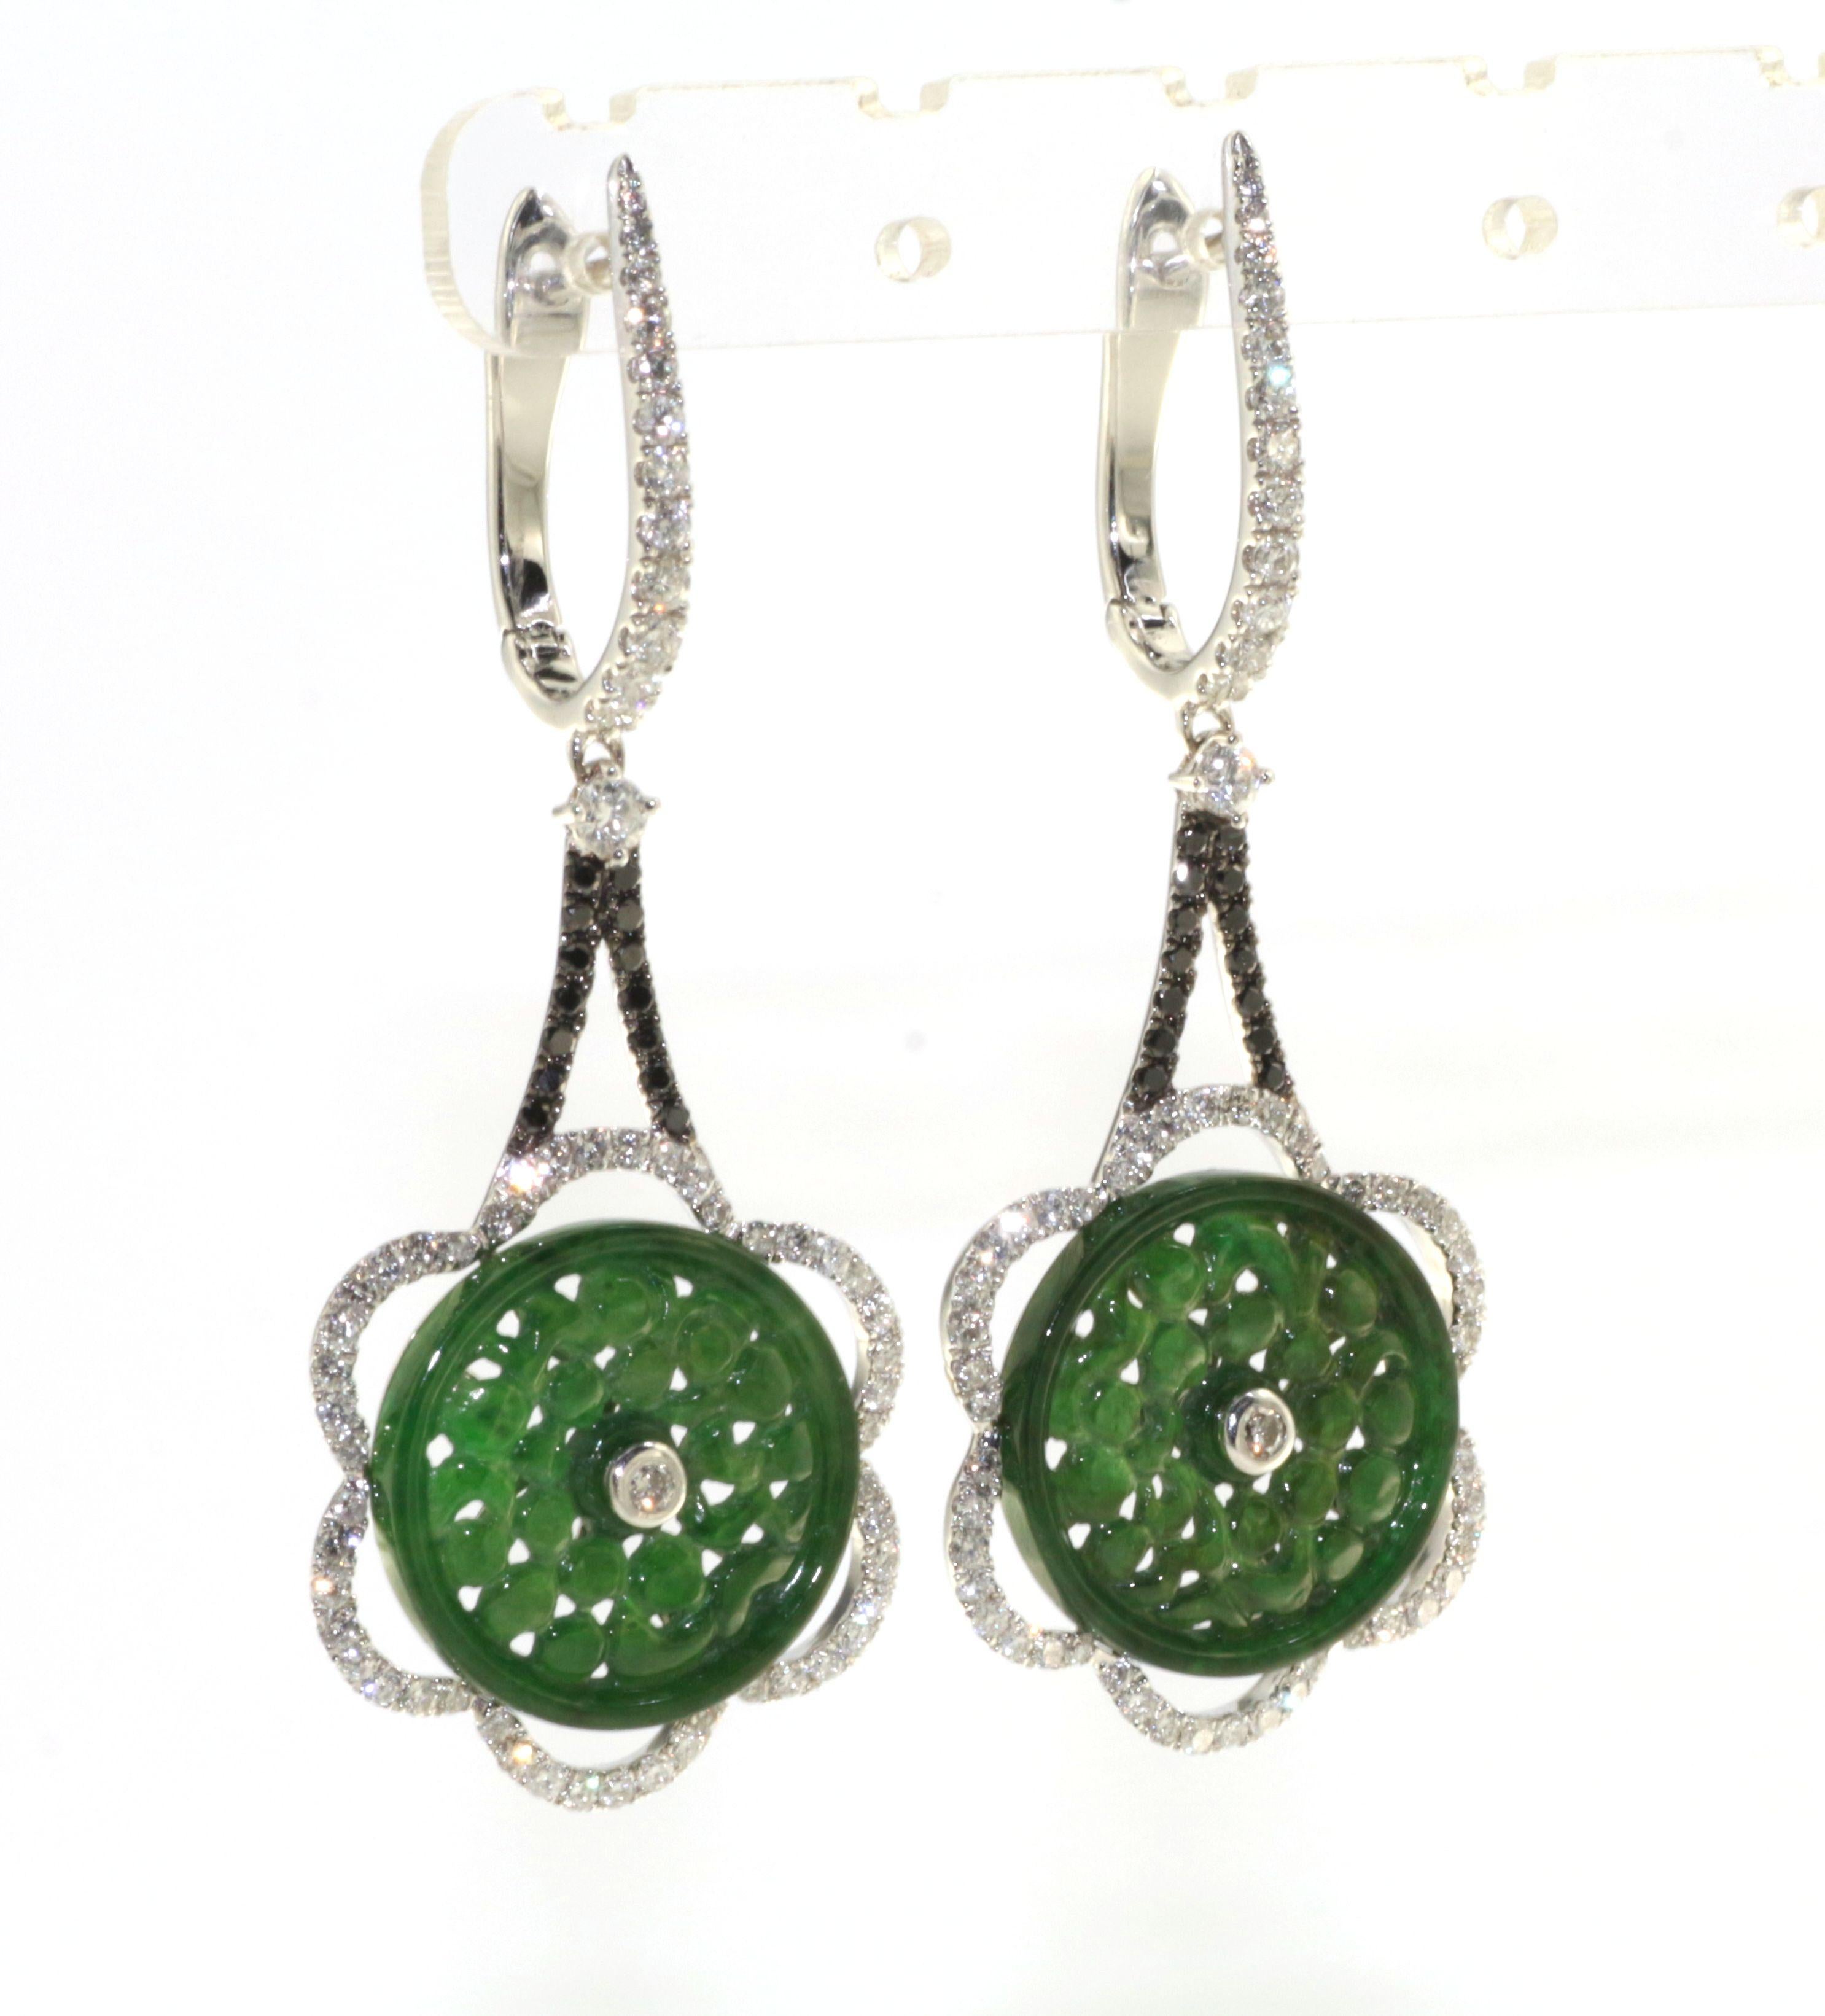 Introducing our exquisite vintage jadeite and diamond dangle earrings, a stunning pair that effortlessly captures the essence of timeless beauty. Crafted in 18 karat rhodium black gold, these earrings exude a sense of sophistication and allure.

The